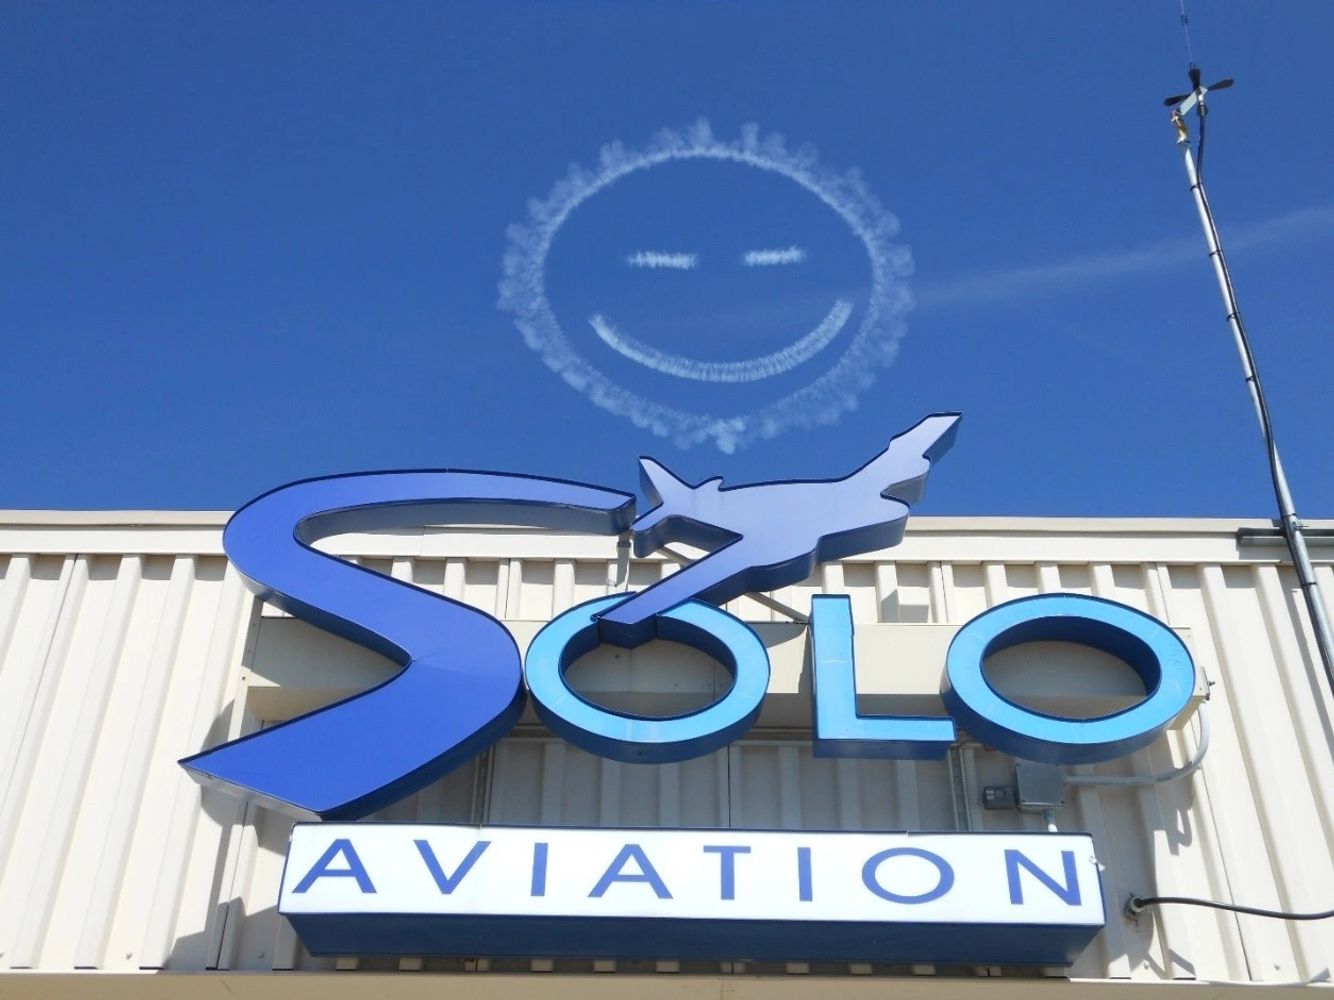 Solo Aviation logo with Skywriting Smile